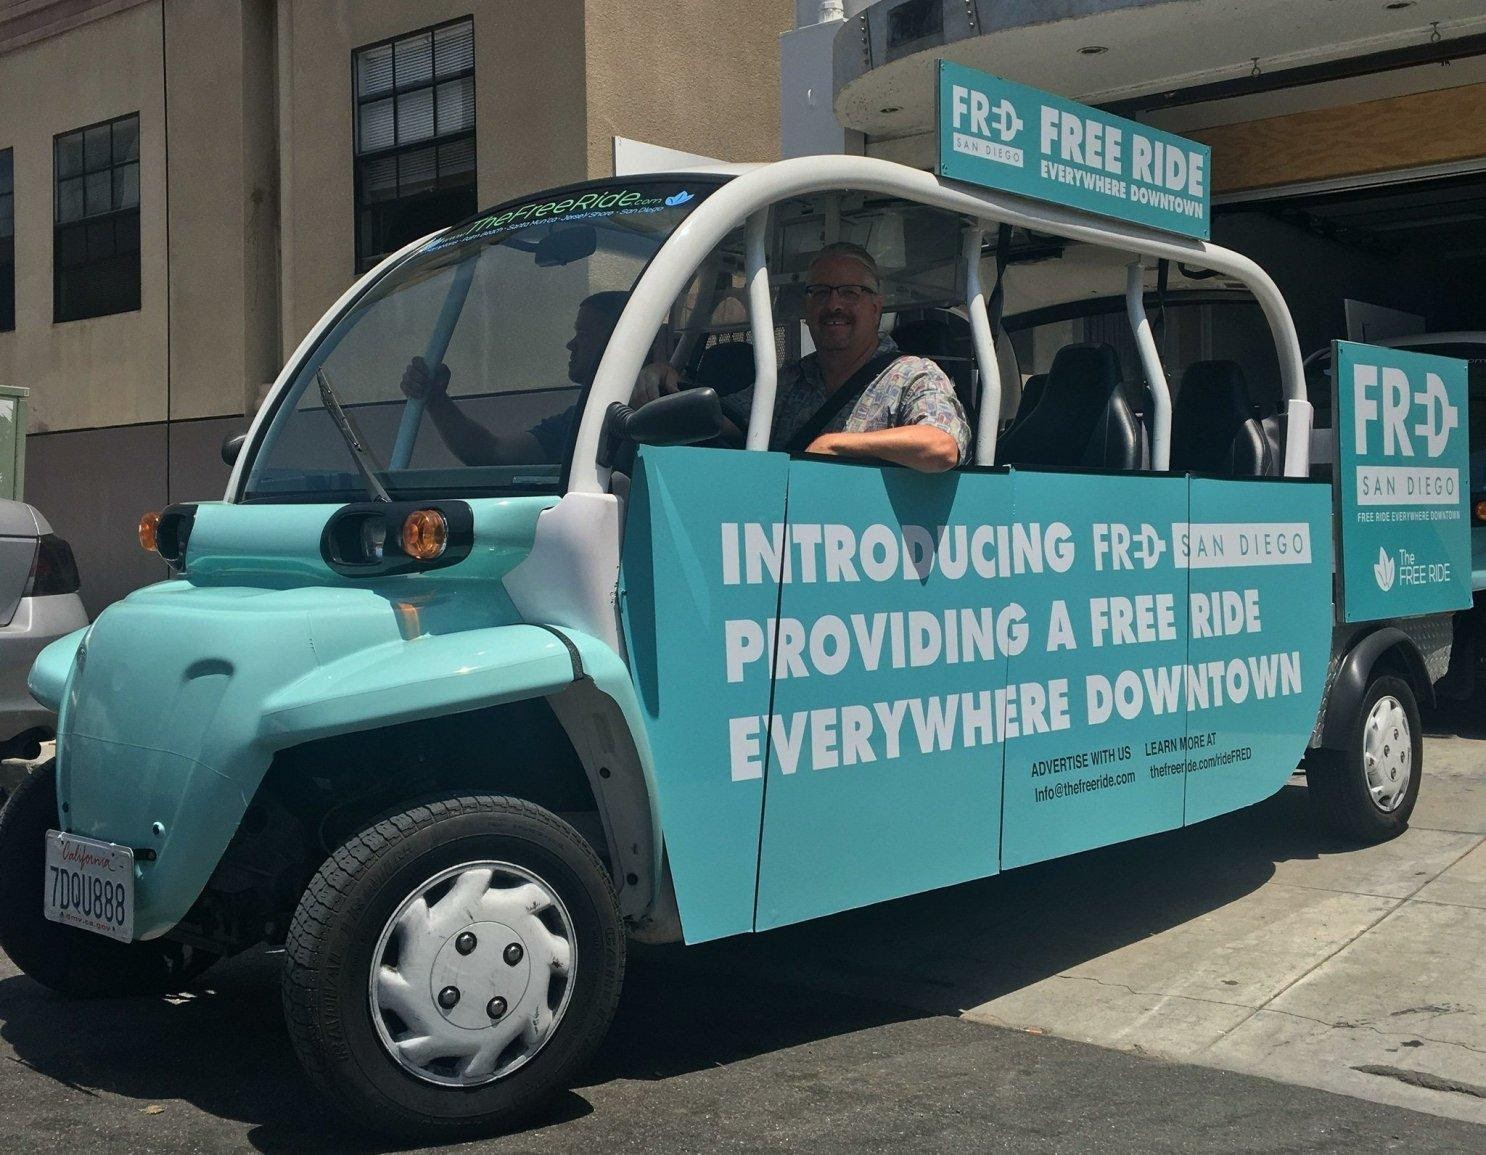 FRED (Free Ride Everywhere Downtown)